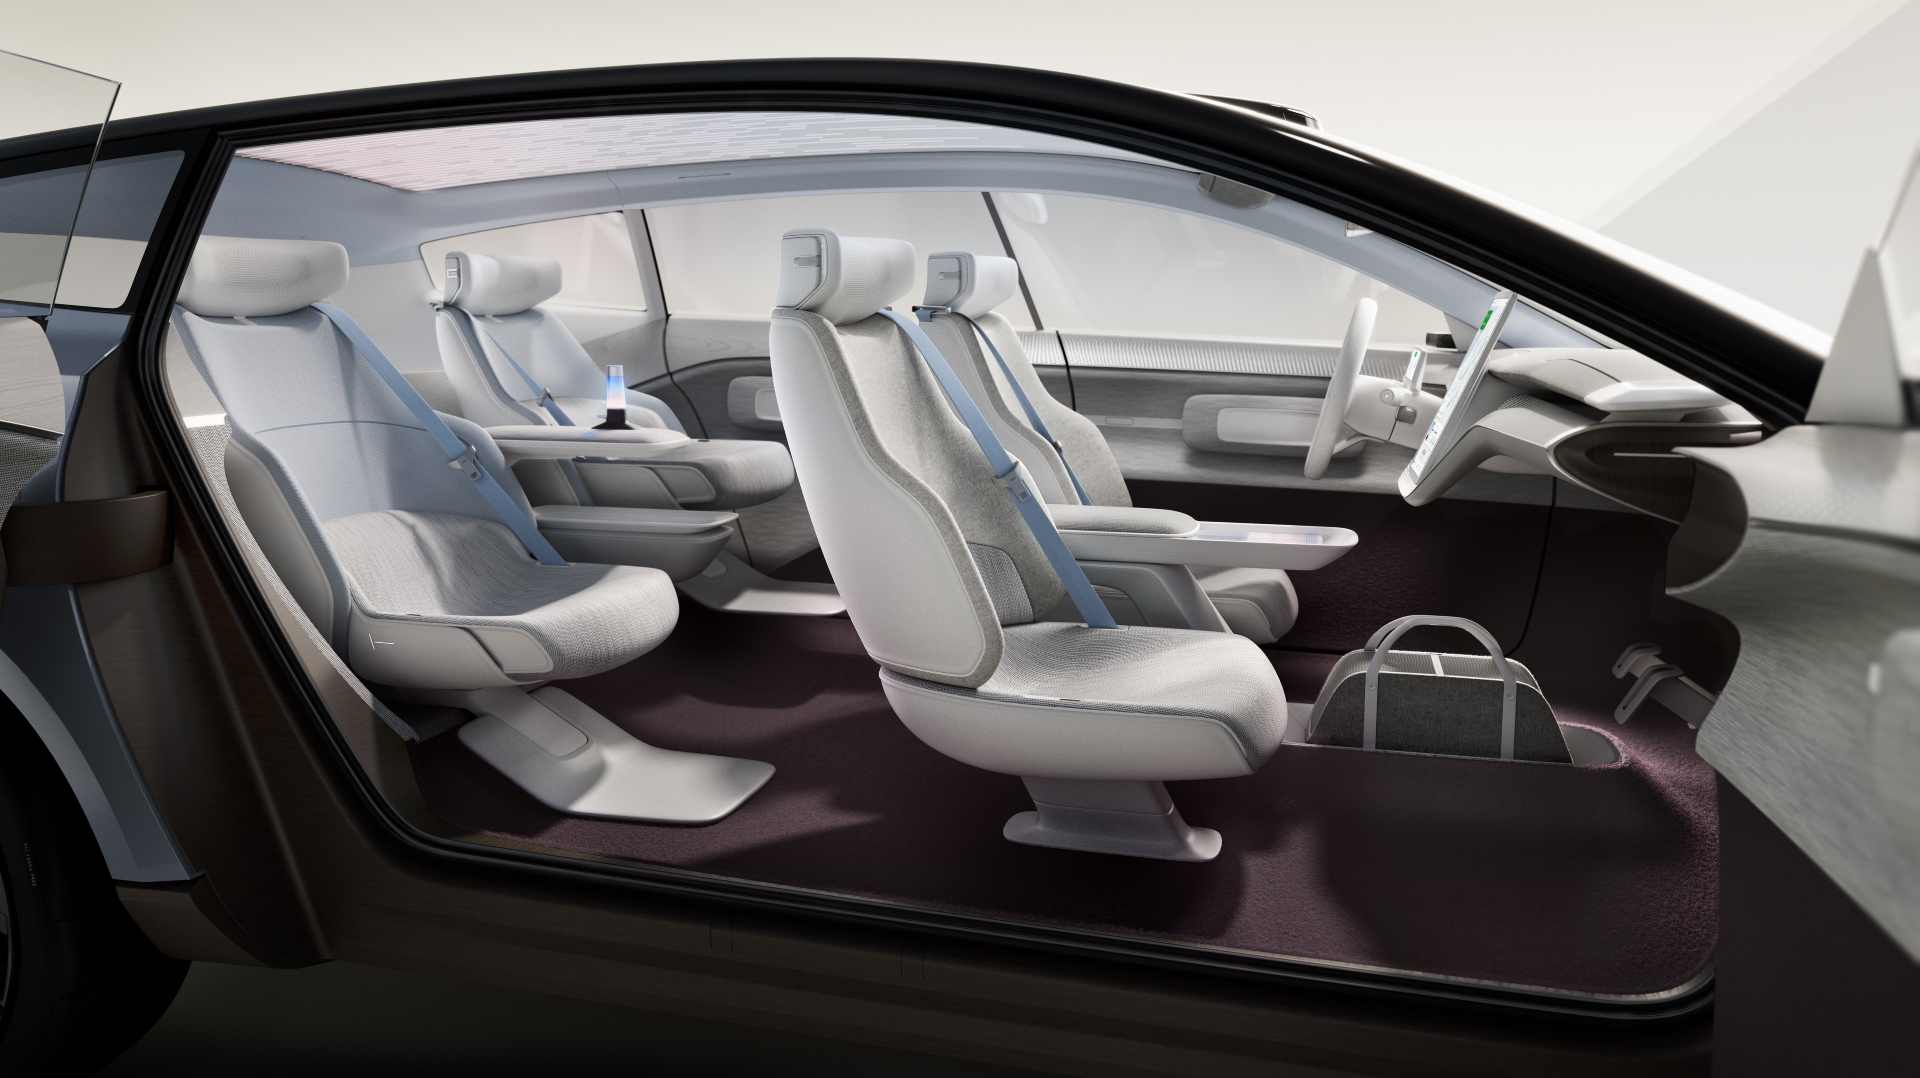 Long wheelbase and flat floor mean there's plenty of space inside the Concept Recharge. Image: Volvo